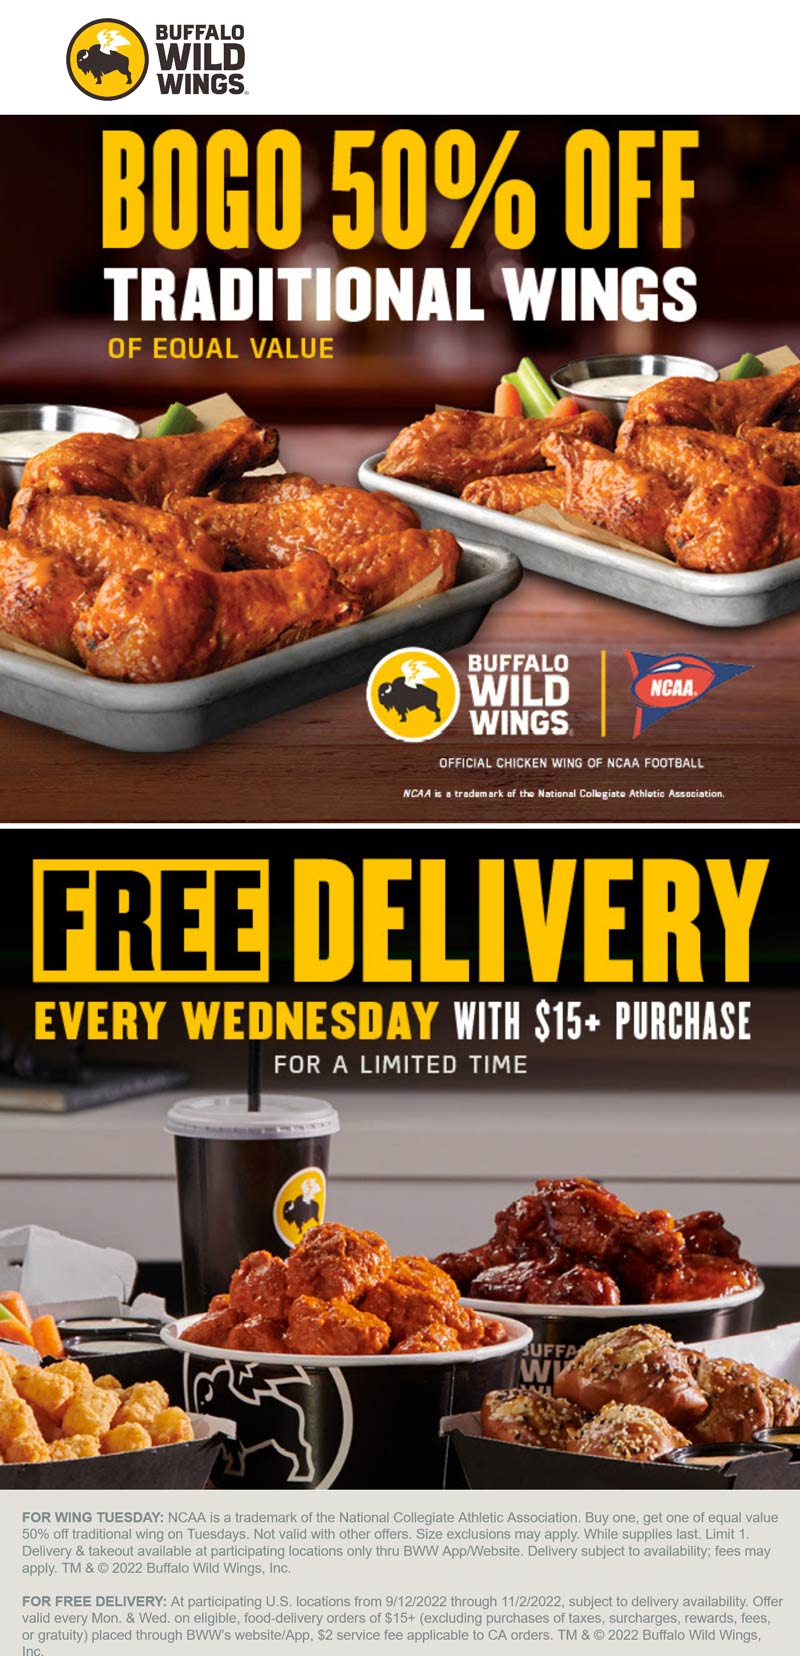 Buffalo Wild Wings restaurants Coupon  Second wings 50% off today at Buffalo Wild Wings restaurants #buffalowildwings 